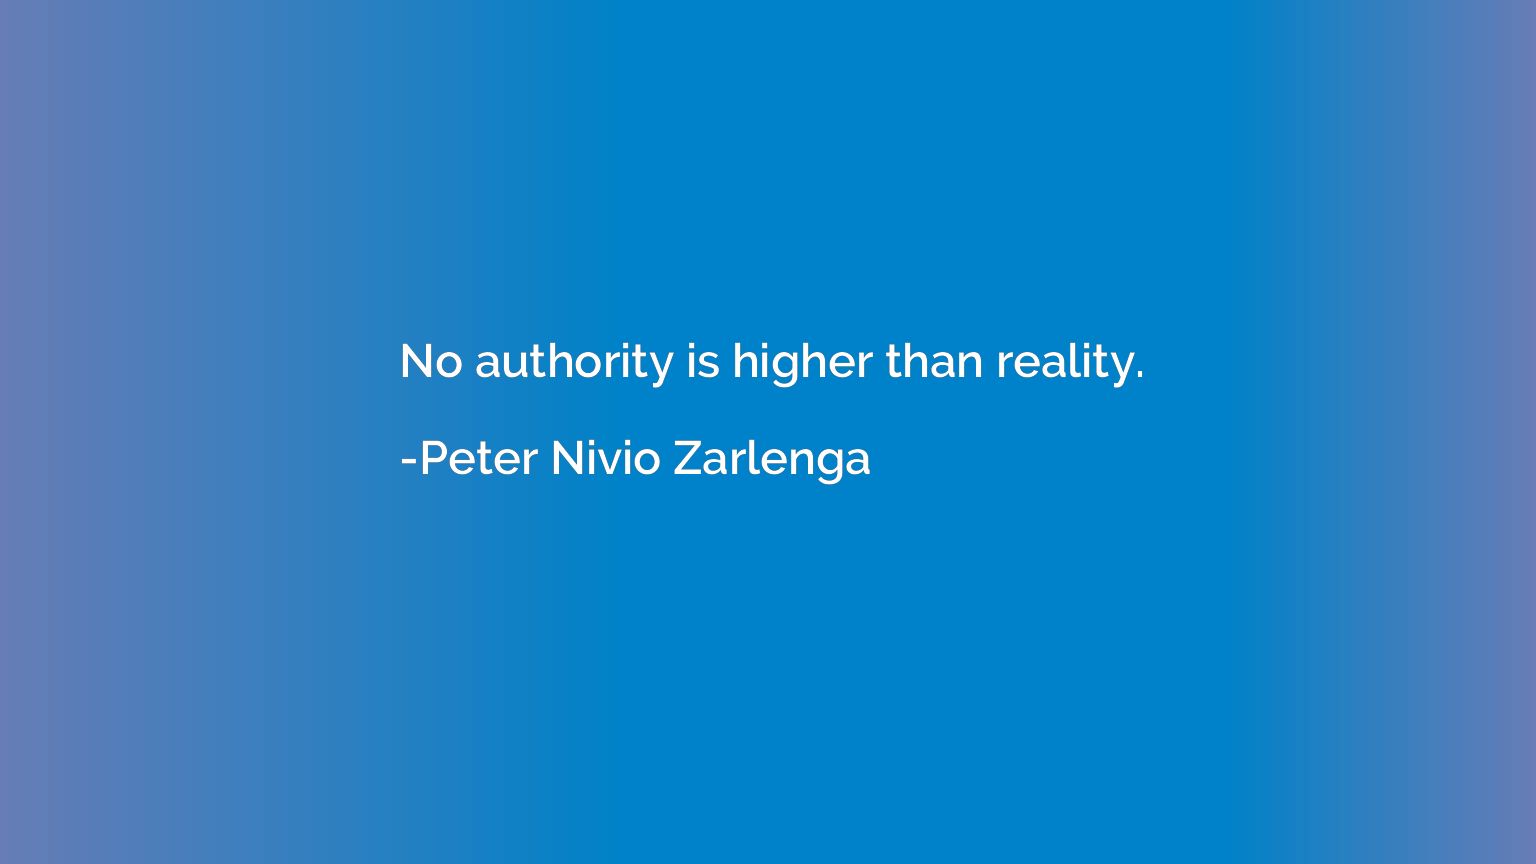 No authority is higher than reality.